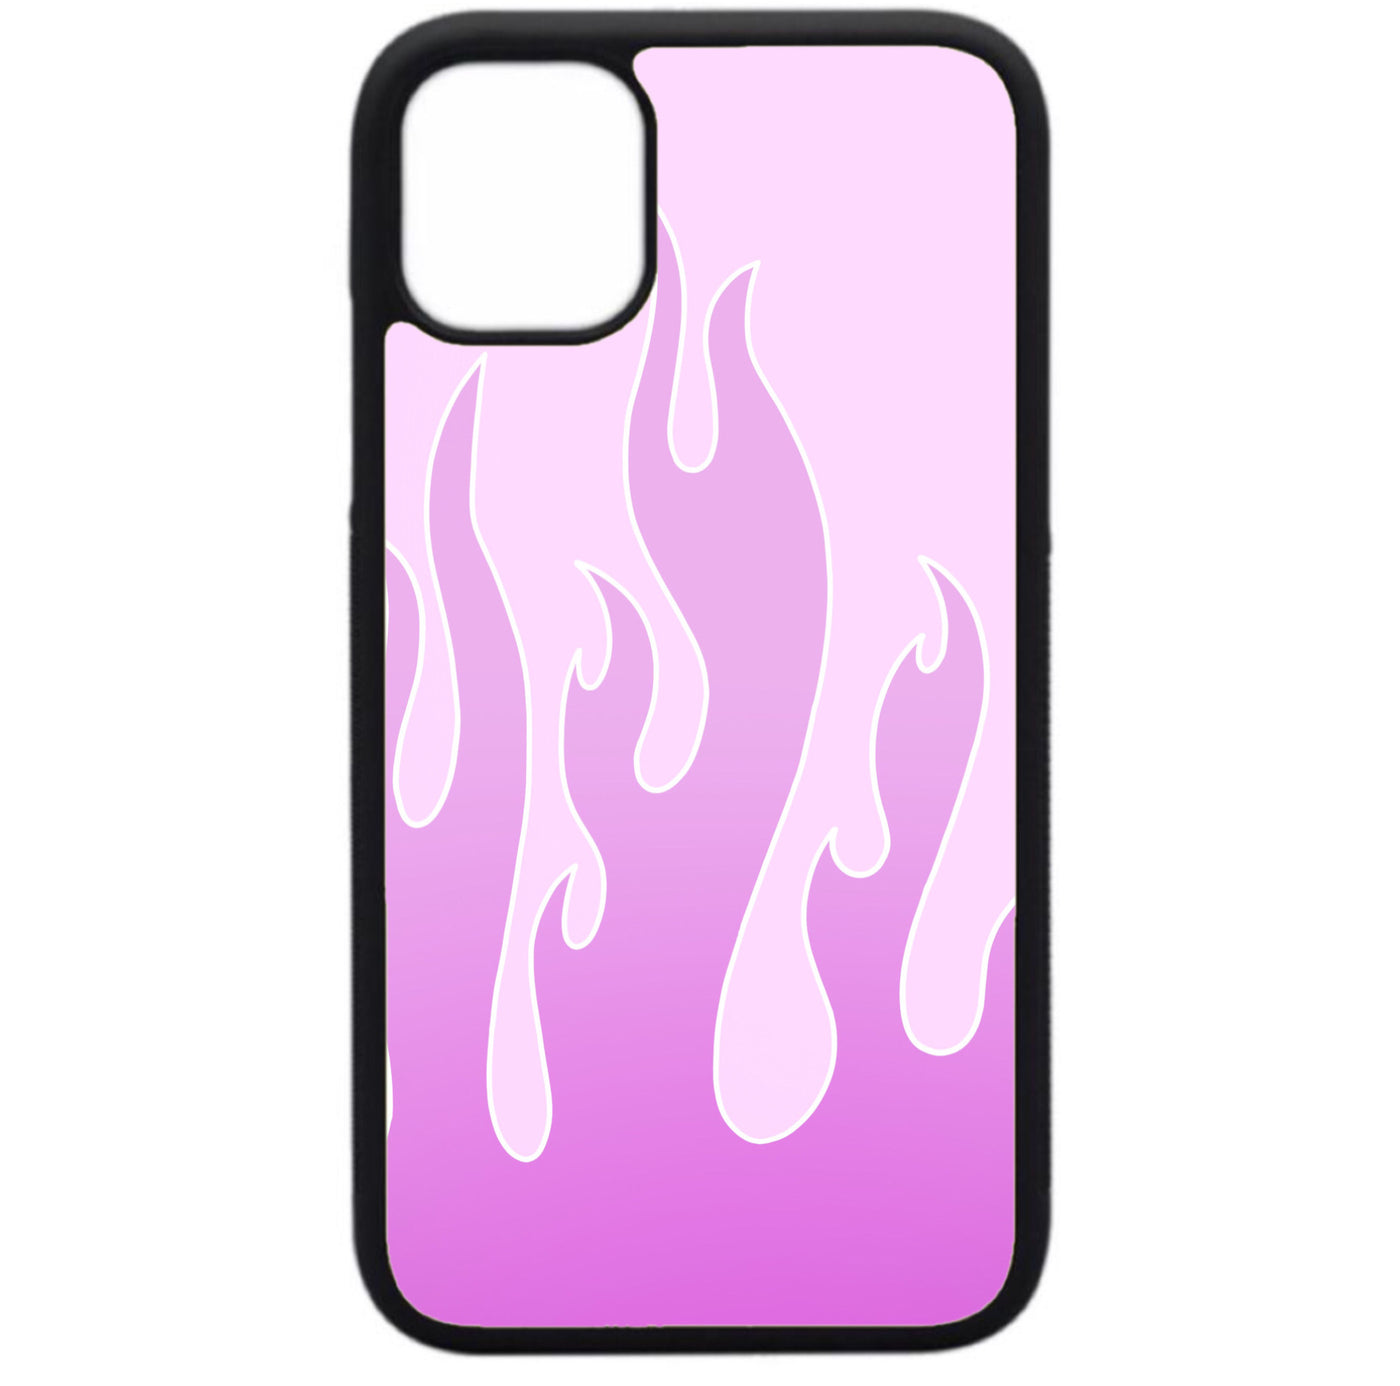 Pink Flames Case